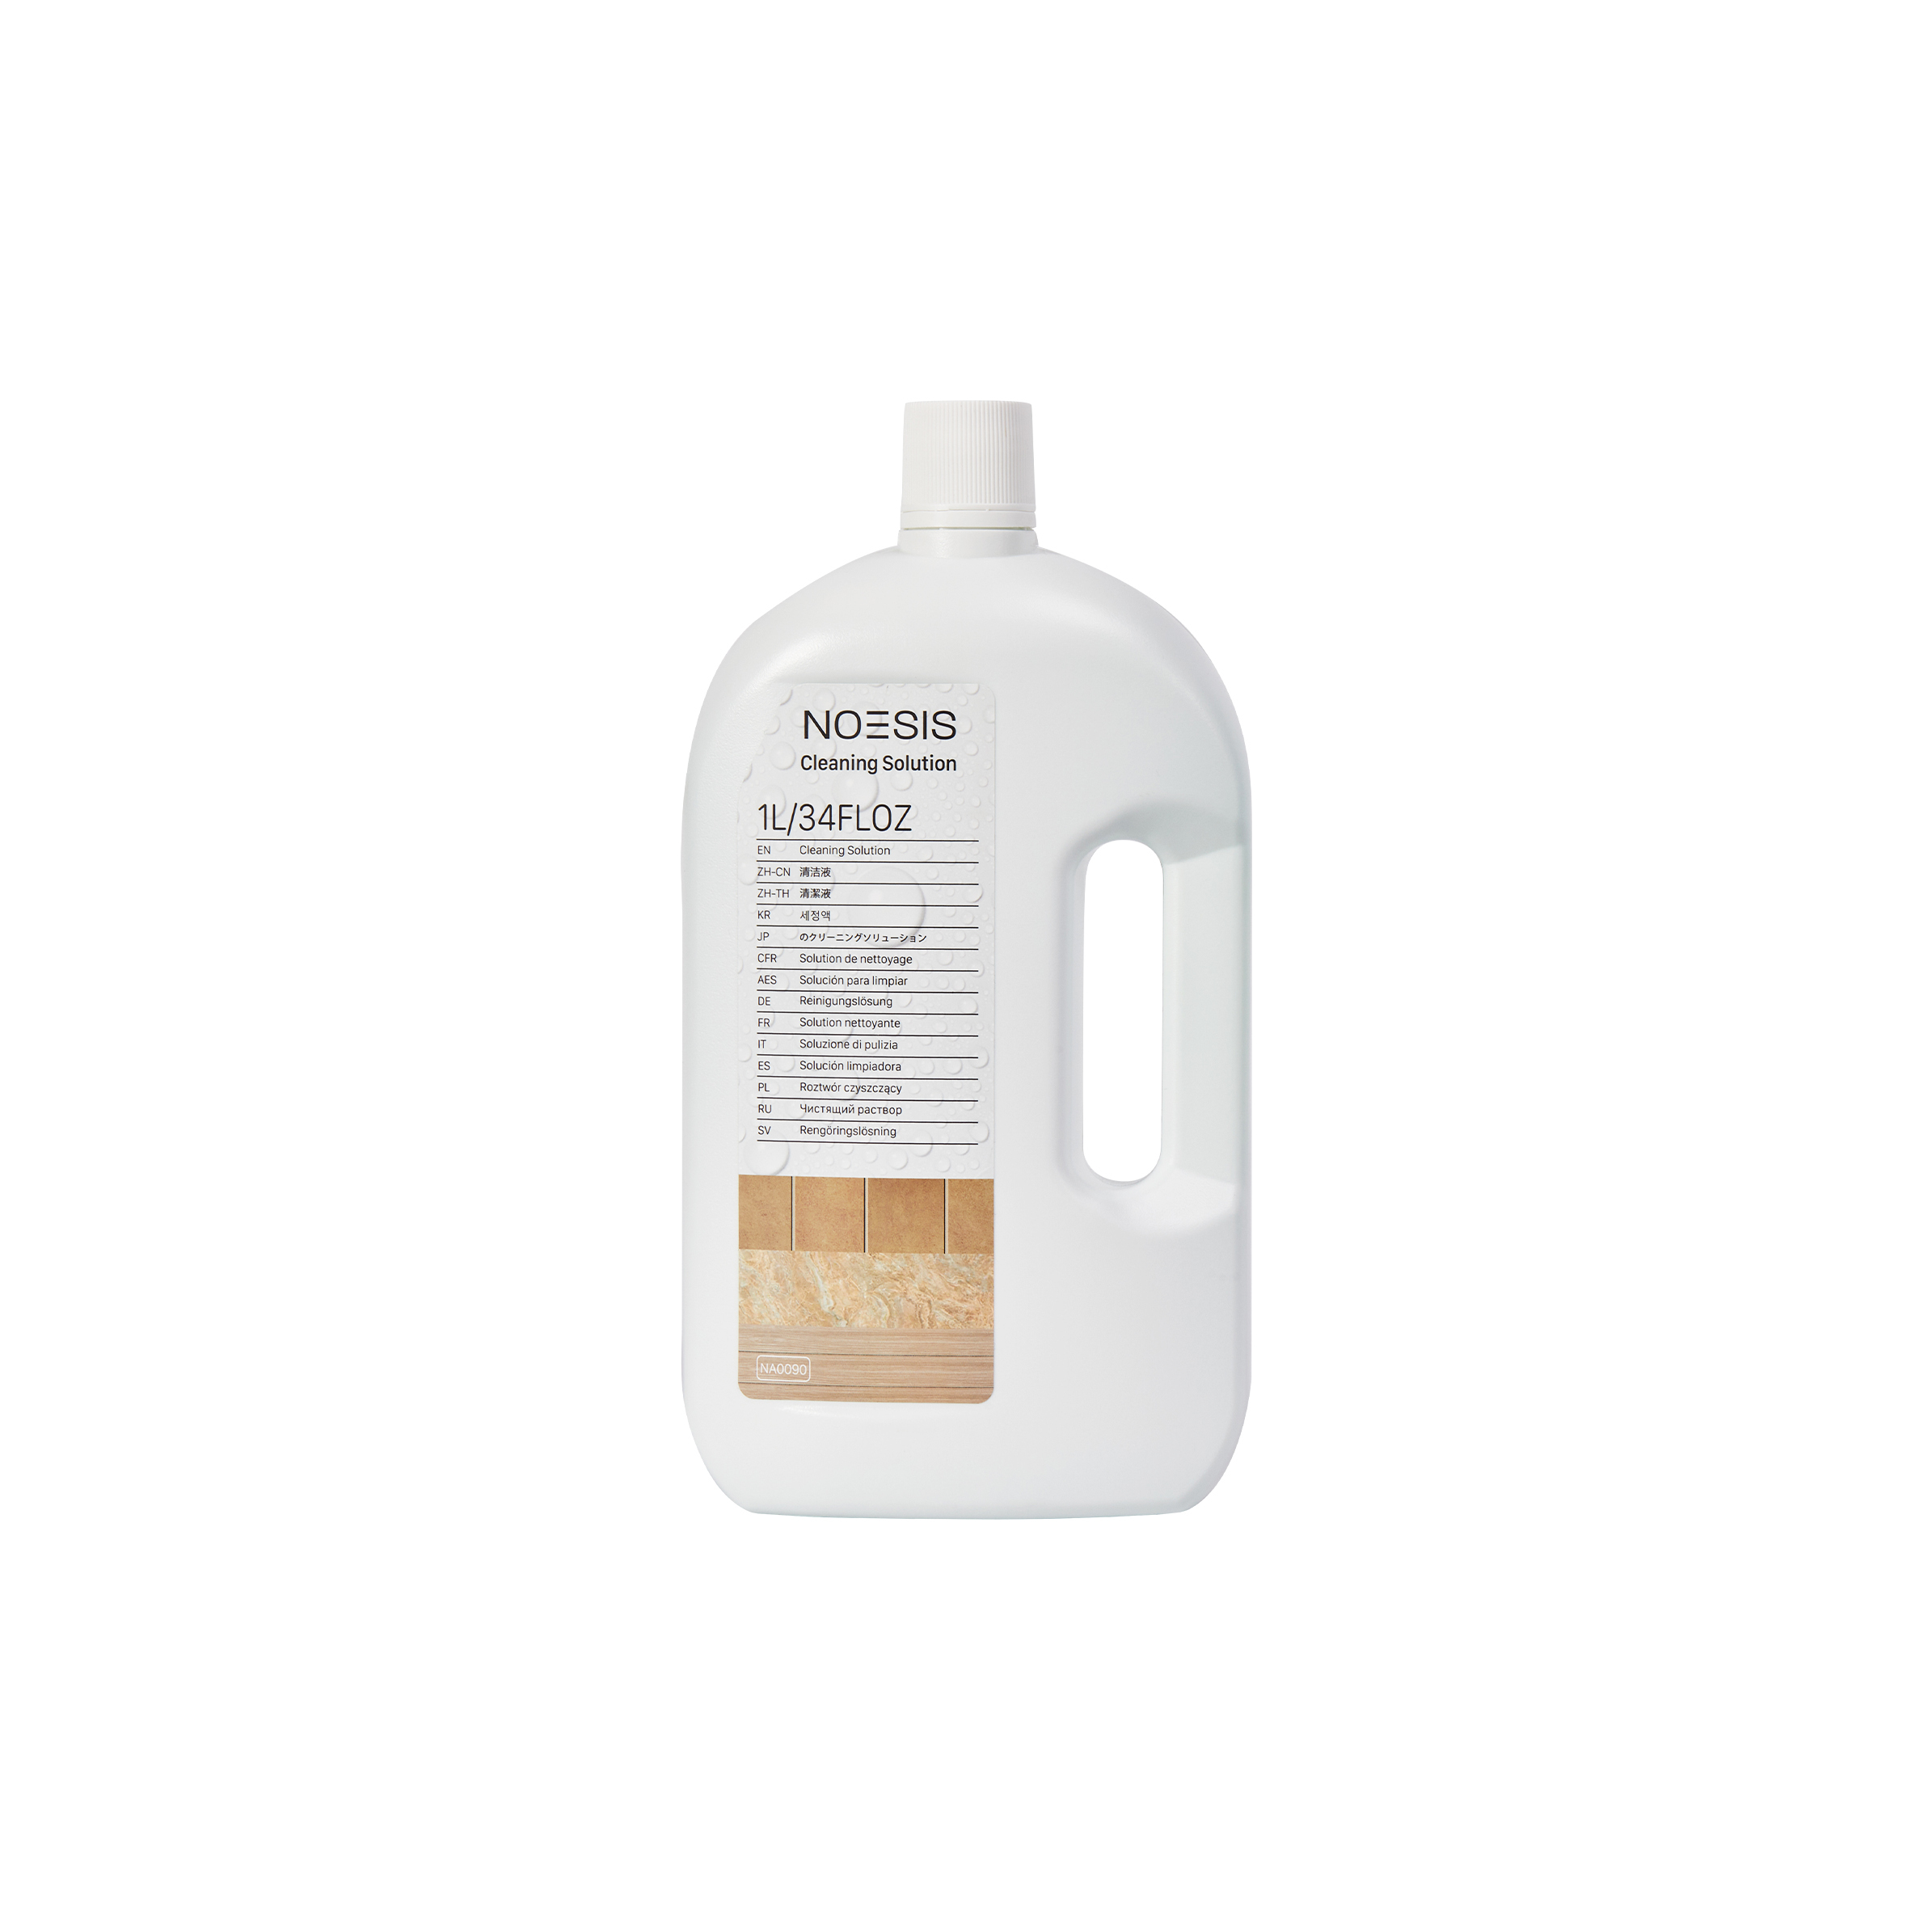 Noesis 1L cleaning solution bottle